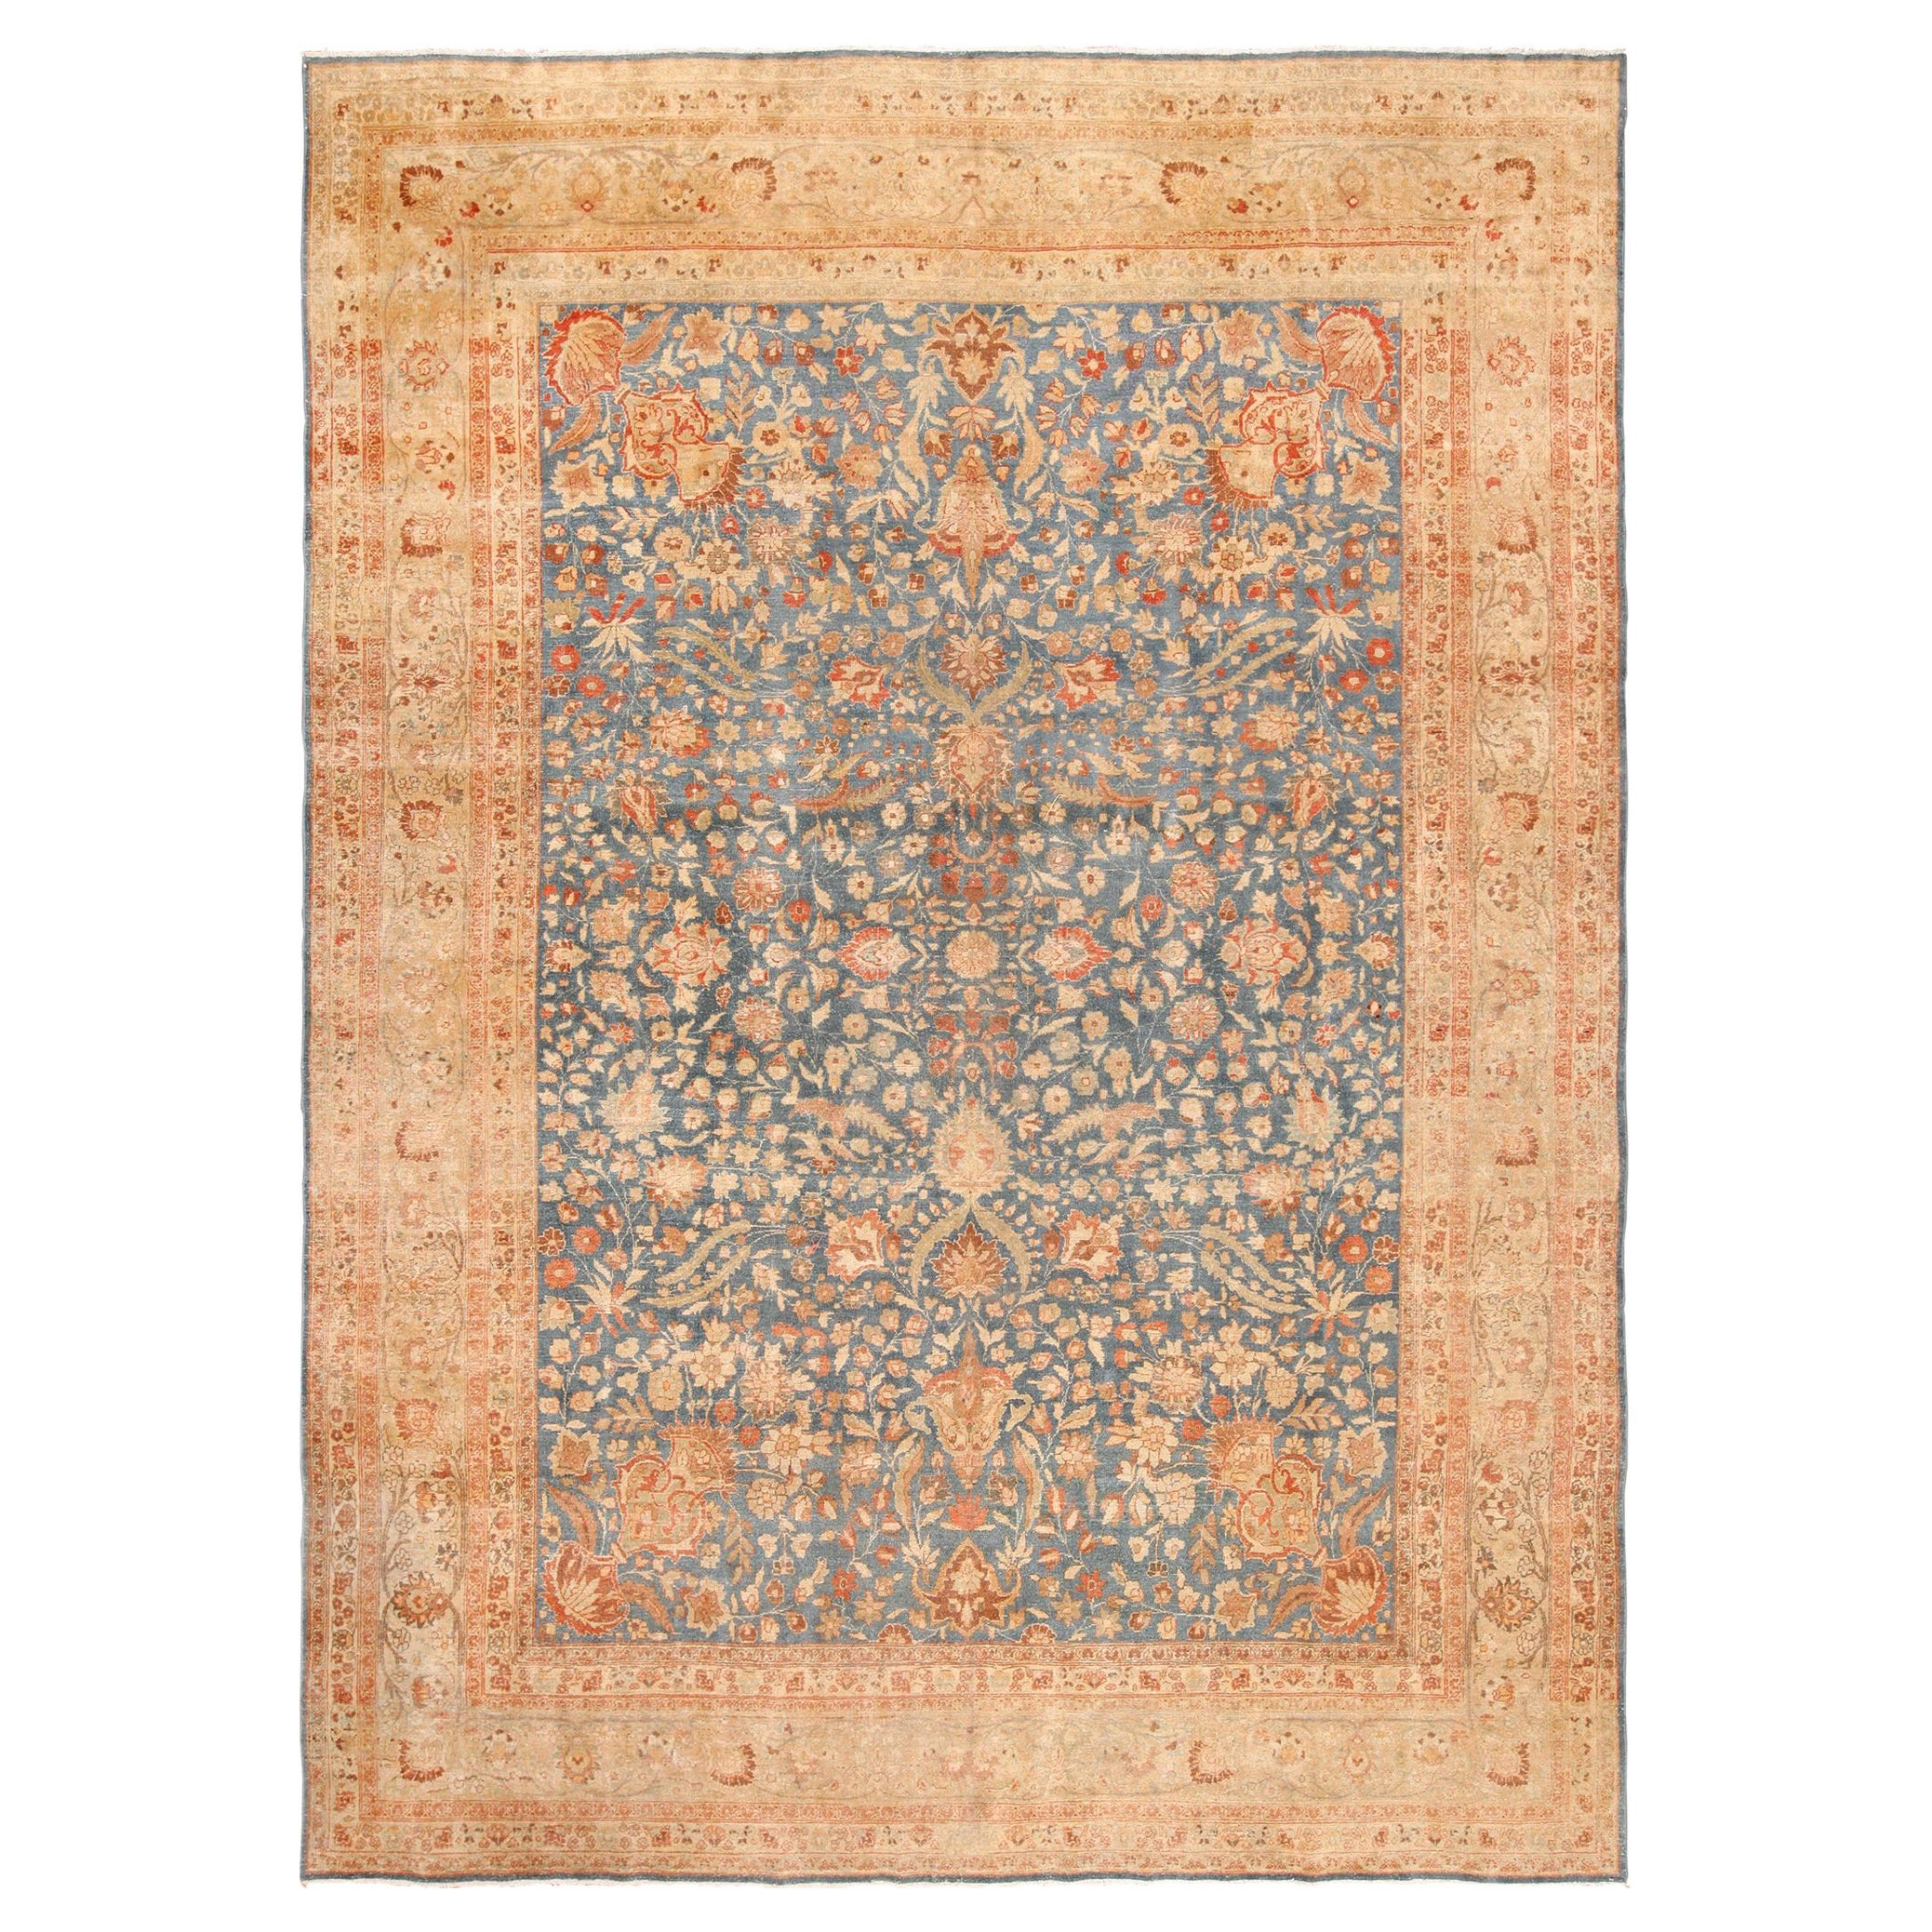 Breathtaking Antique Room Size Blue and Rust Persian Khorassan Rug 10' x 14'6" For Sale